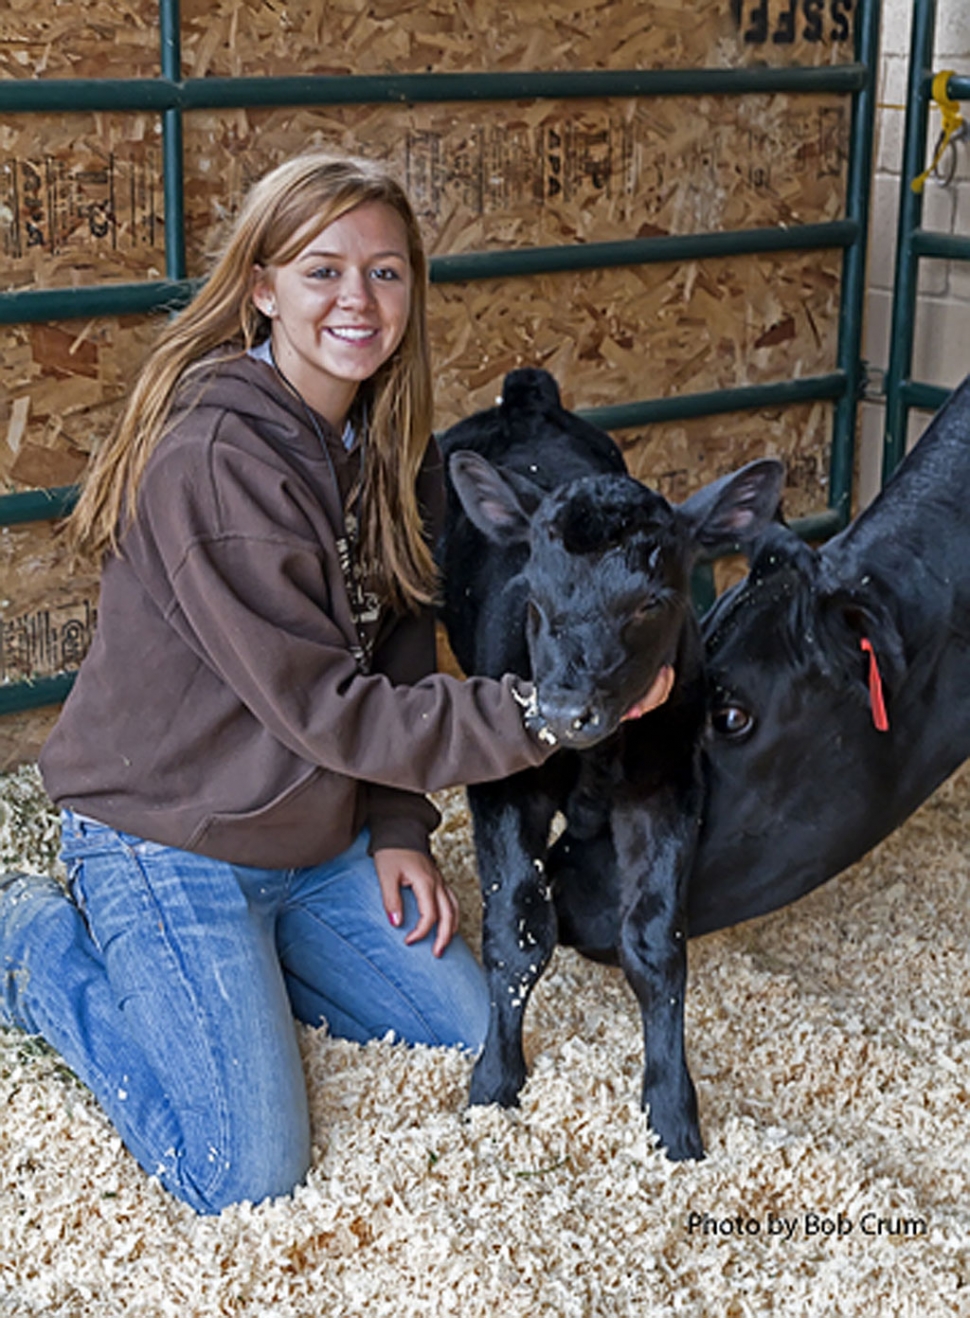 Alexus Galassi,16, Vice Presidentof Fillmore FFA is pictured with her heifer Talula and the baby Kaliapi who was born at the fair this past week.